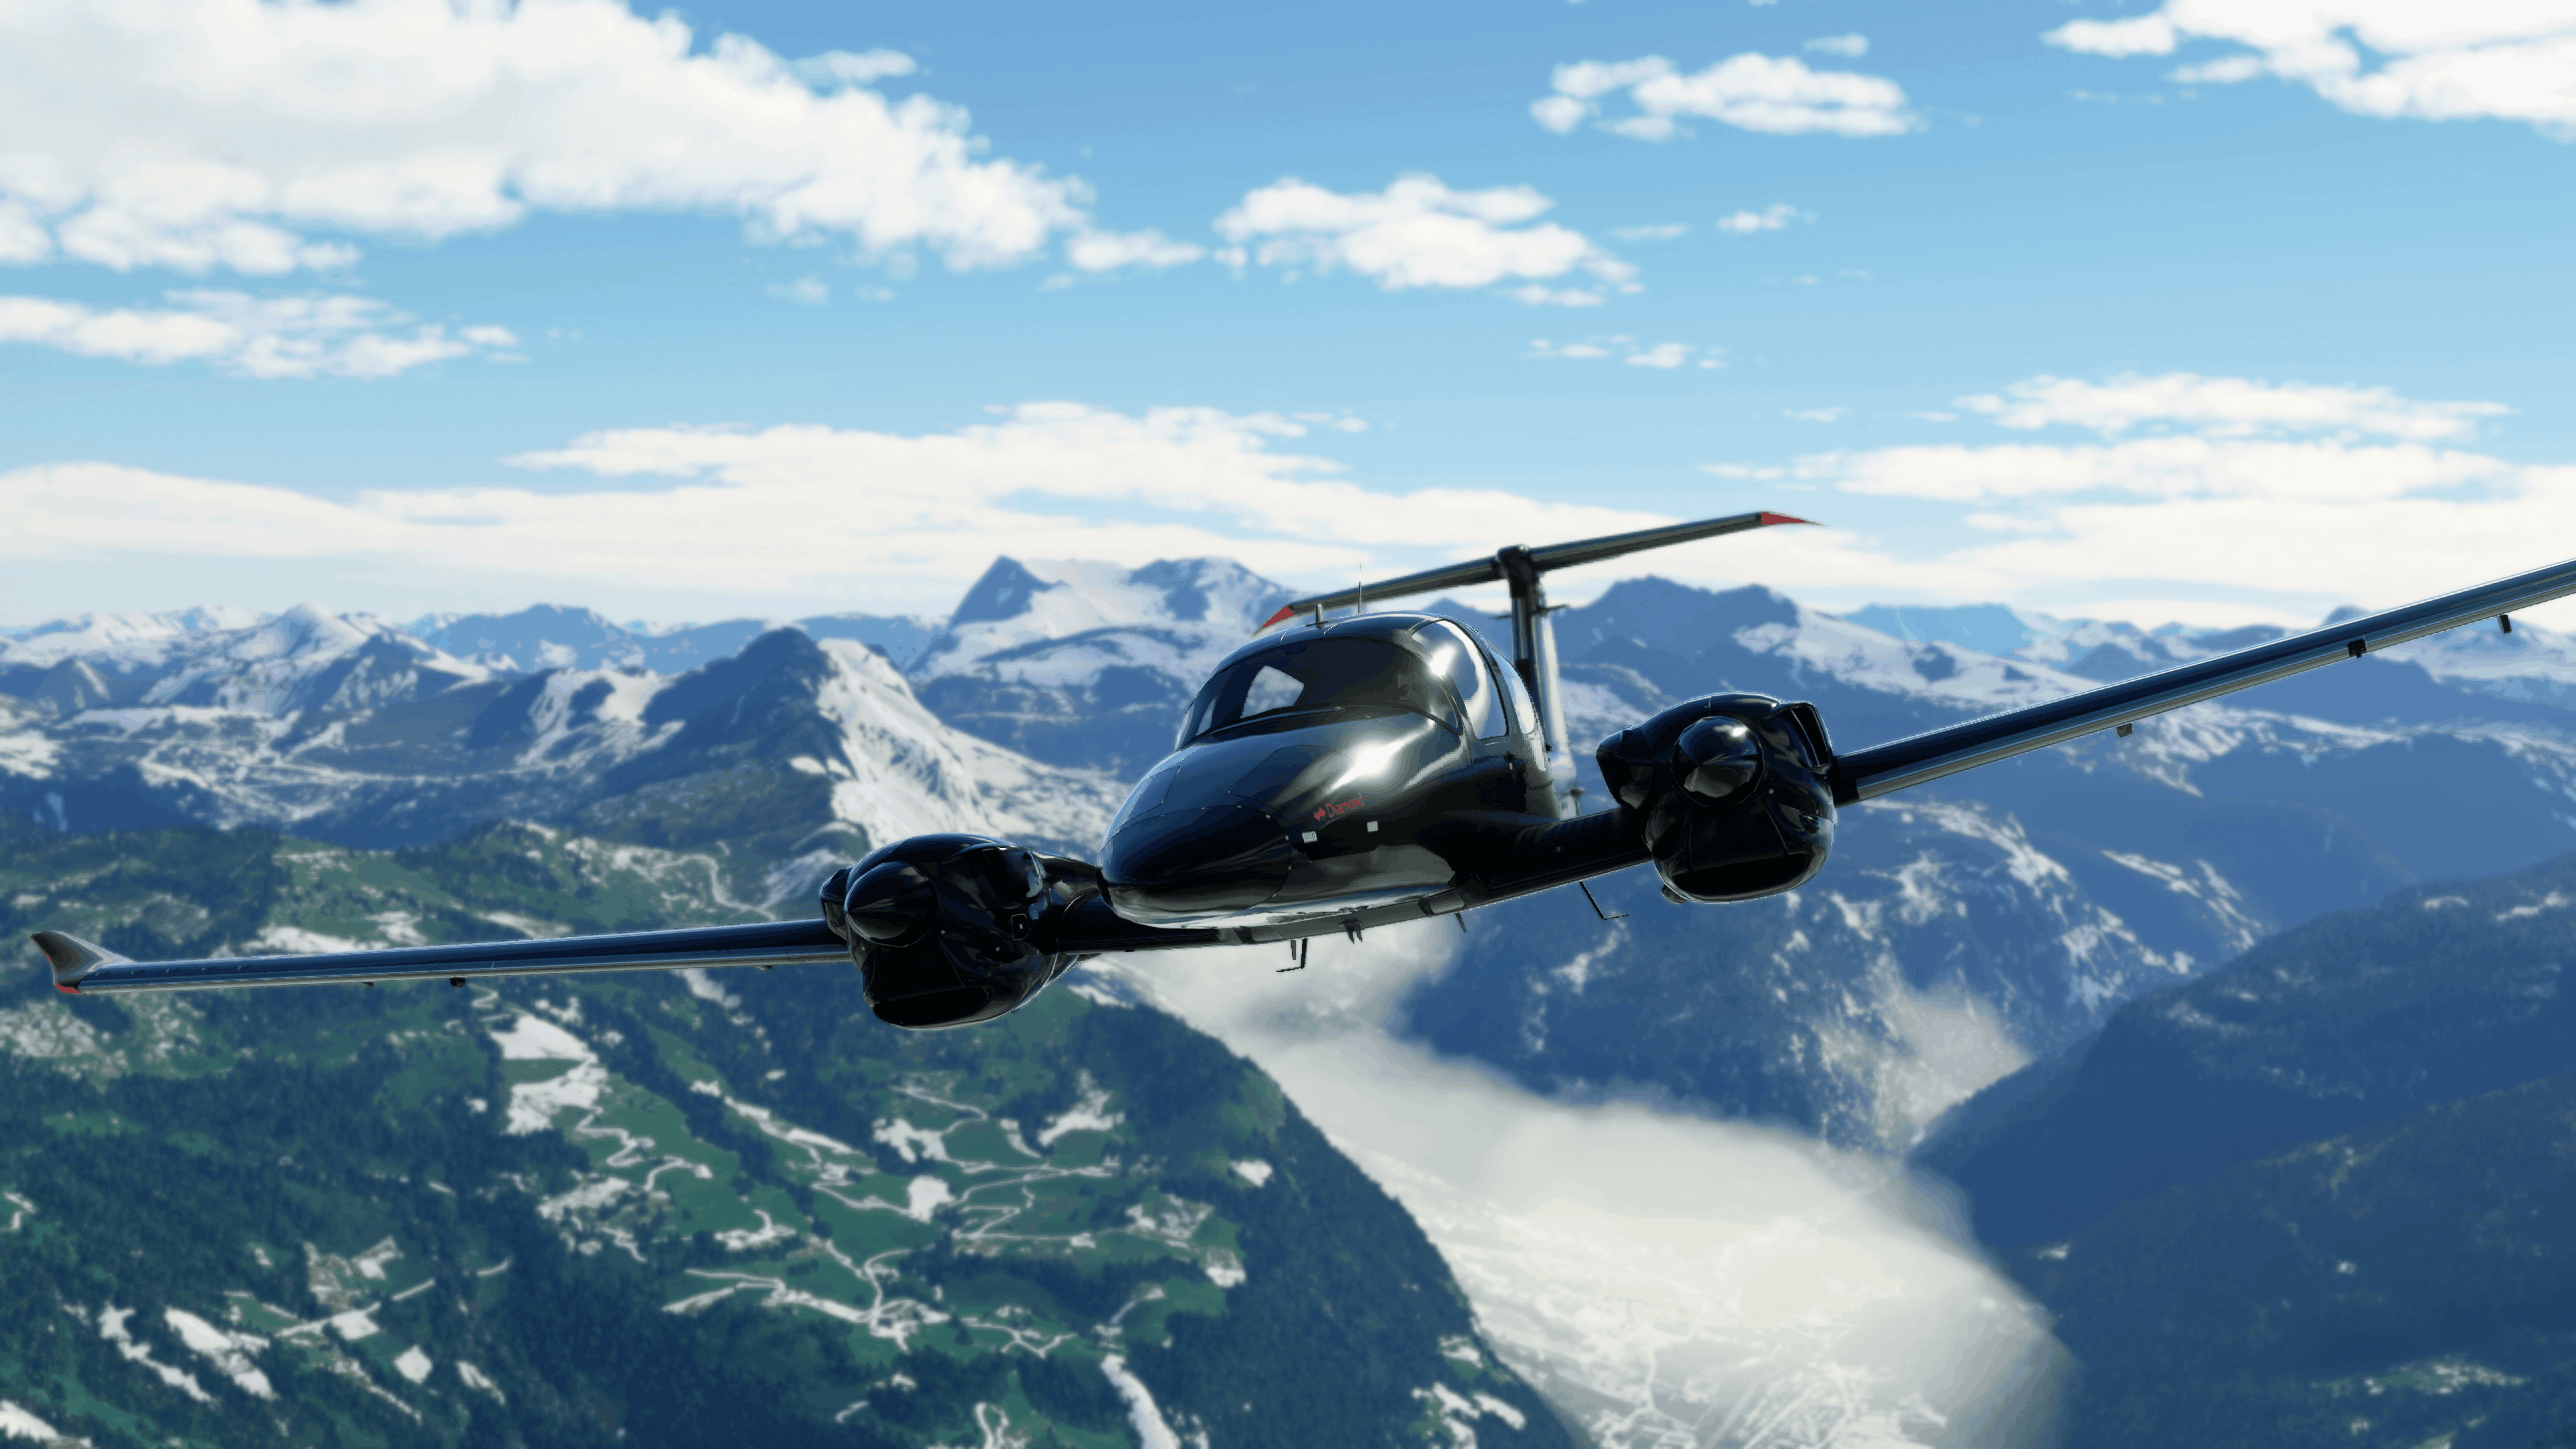 MS Flight Simulator on consoles: Finally, a next-gen game for Xbox Series X/S